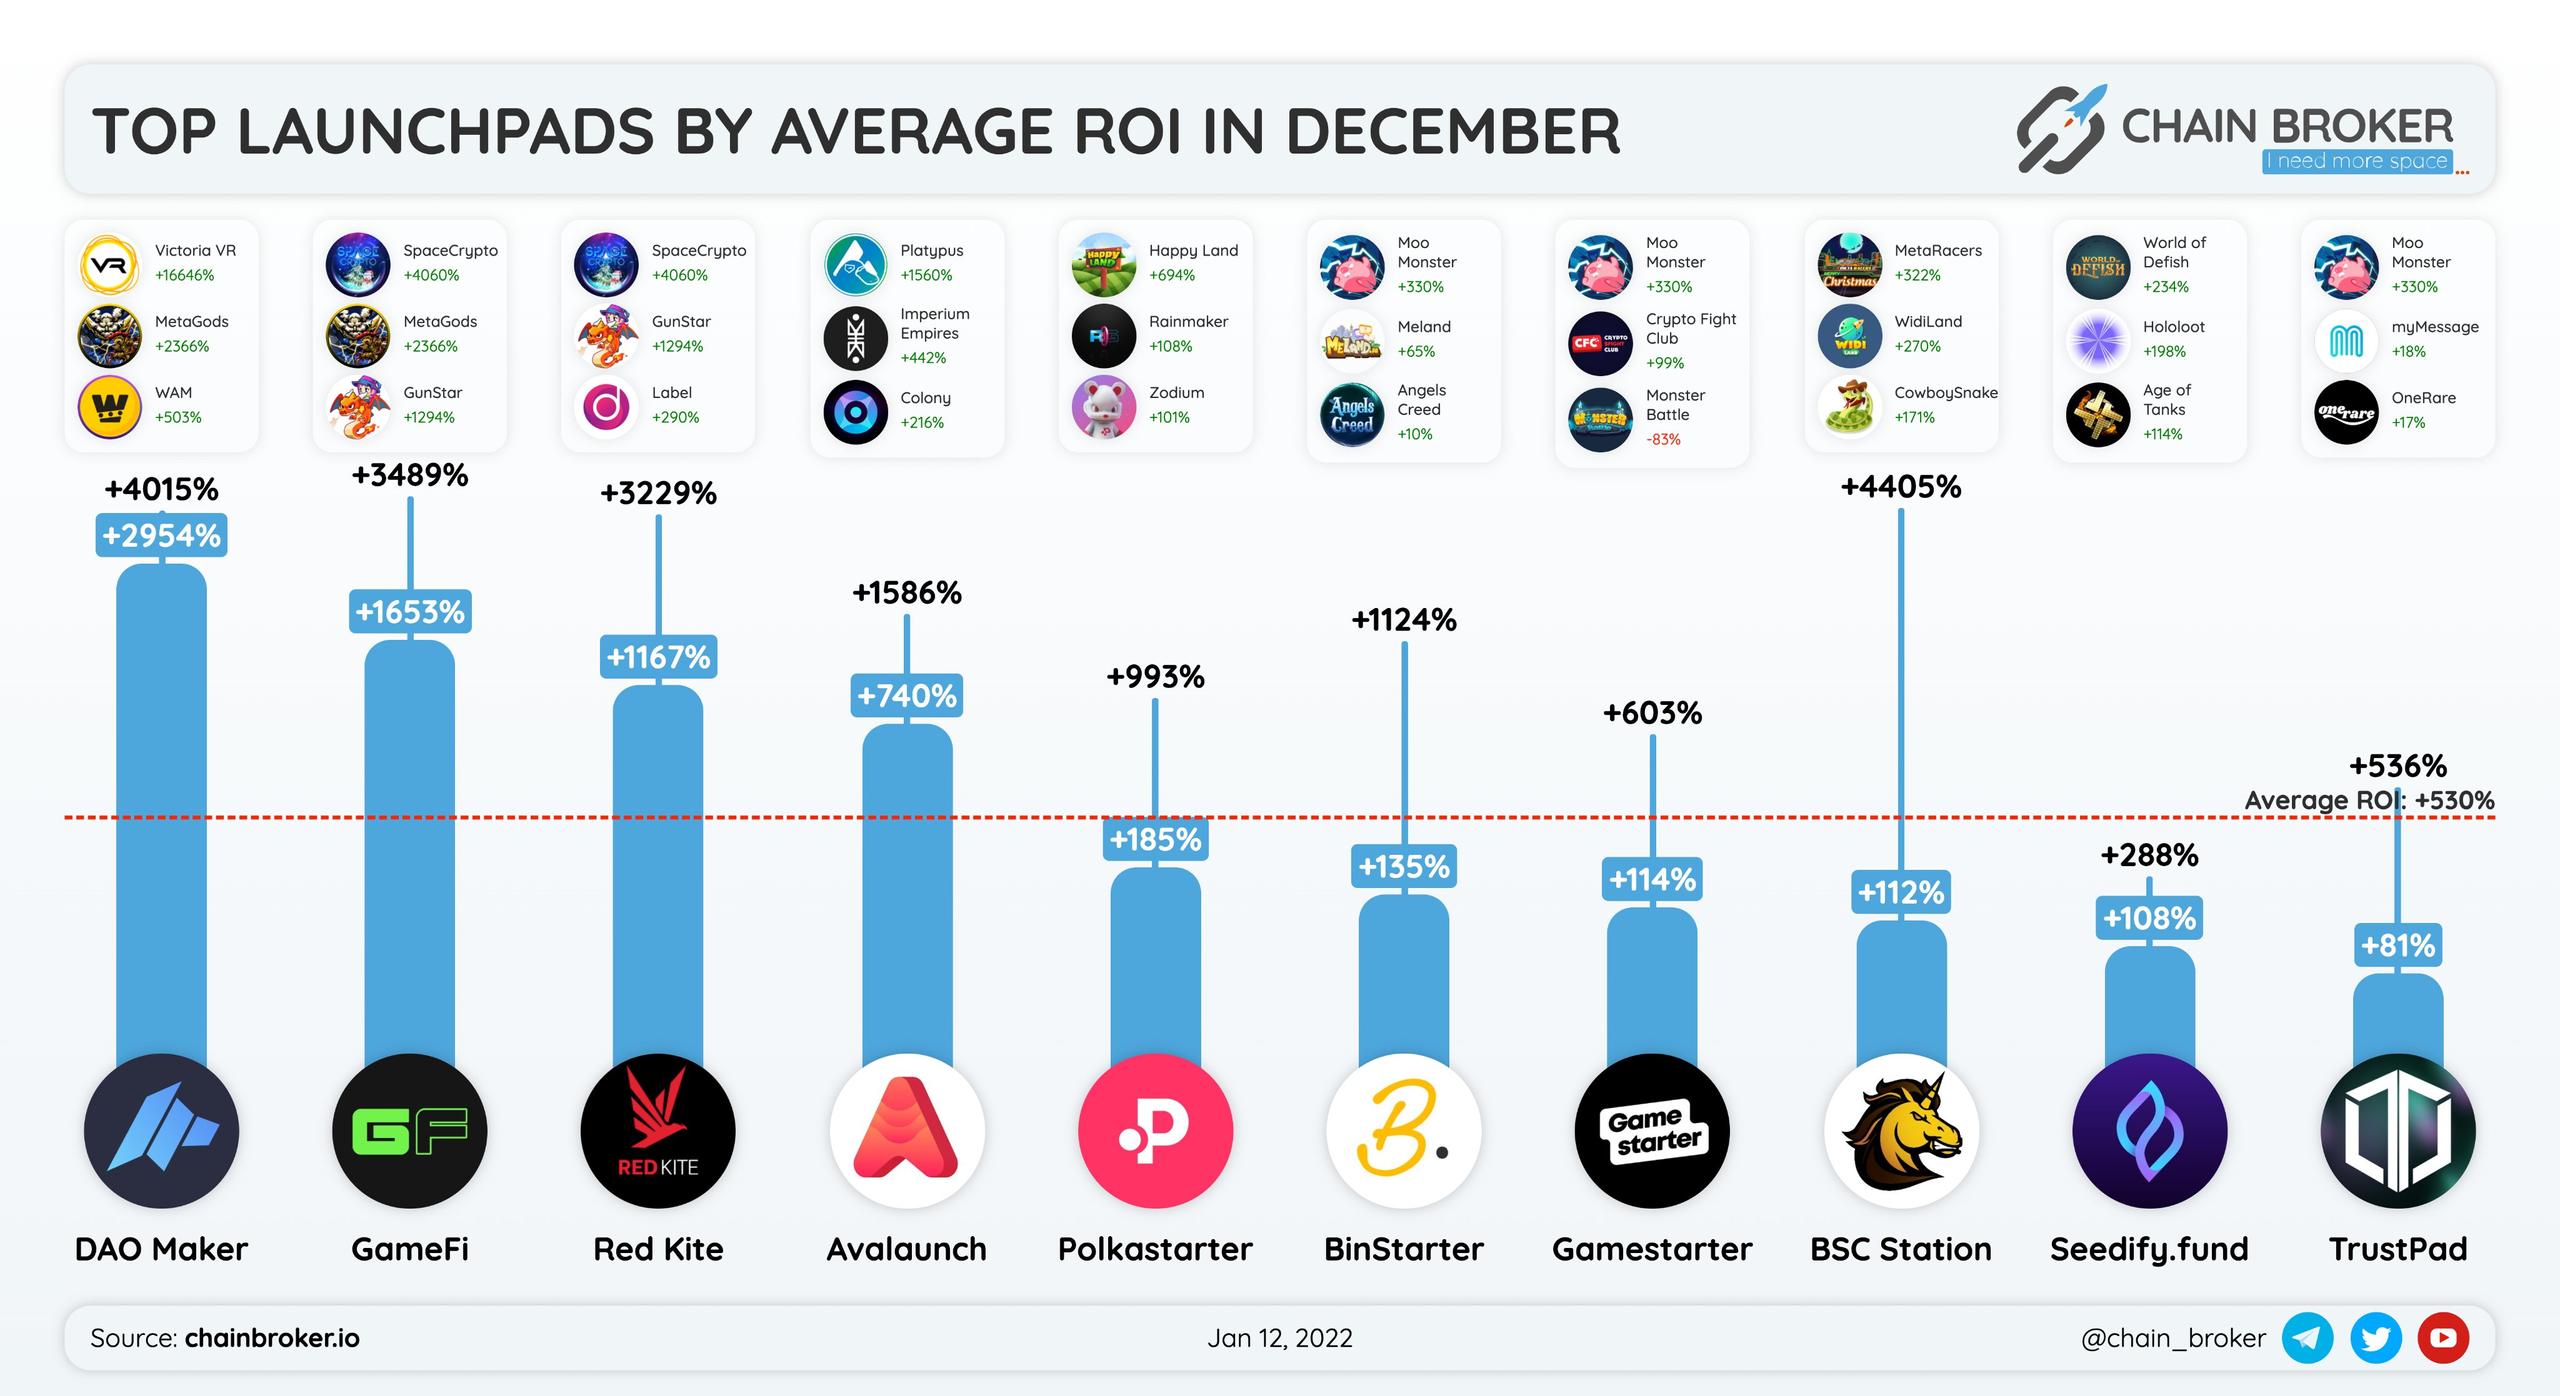 Top launchpads by average ROI in December